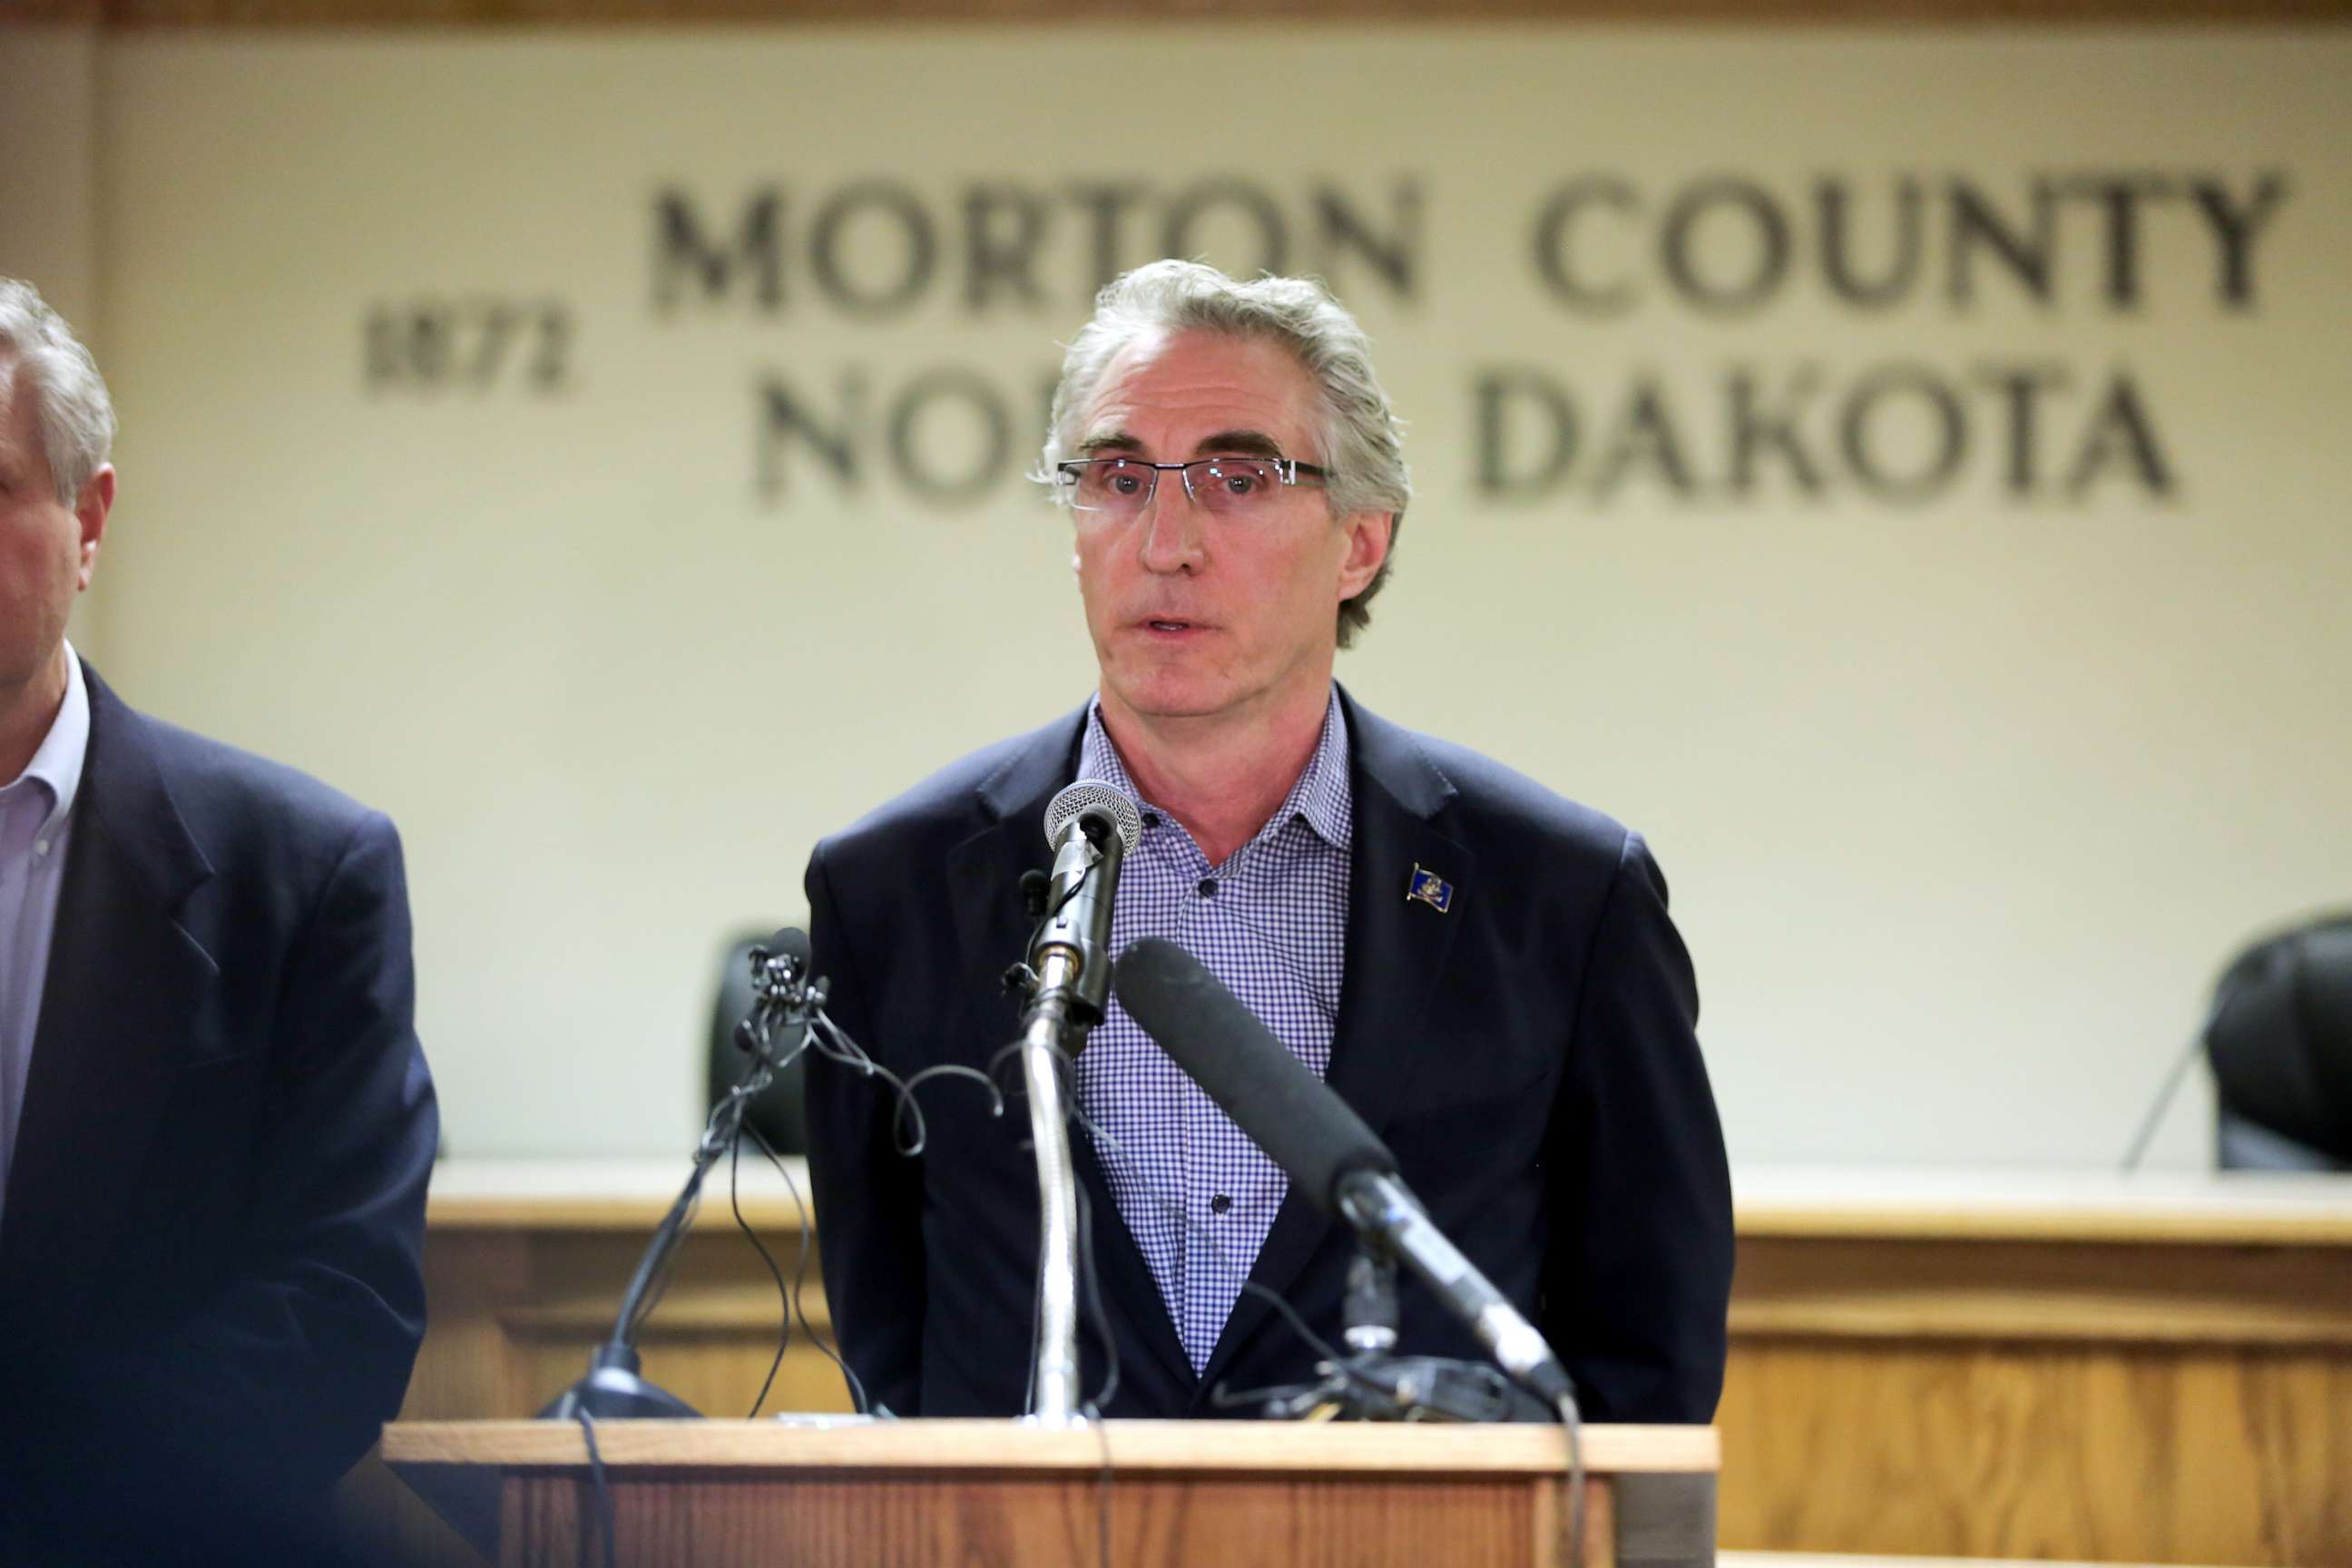 PHOTO: North Dakota Governor Doug Burgum speaks during a press conference announcing plans for the clean up of the Oceti Sakowin protest camp on Feb. 22, 2017 in Mandan, N.D.